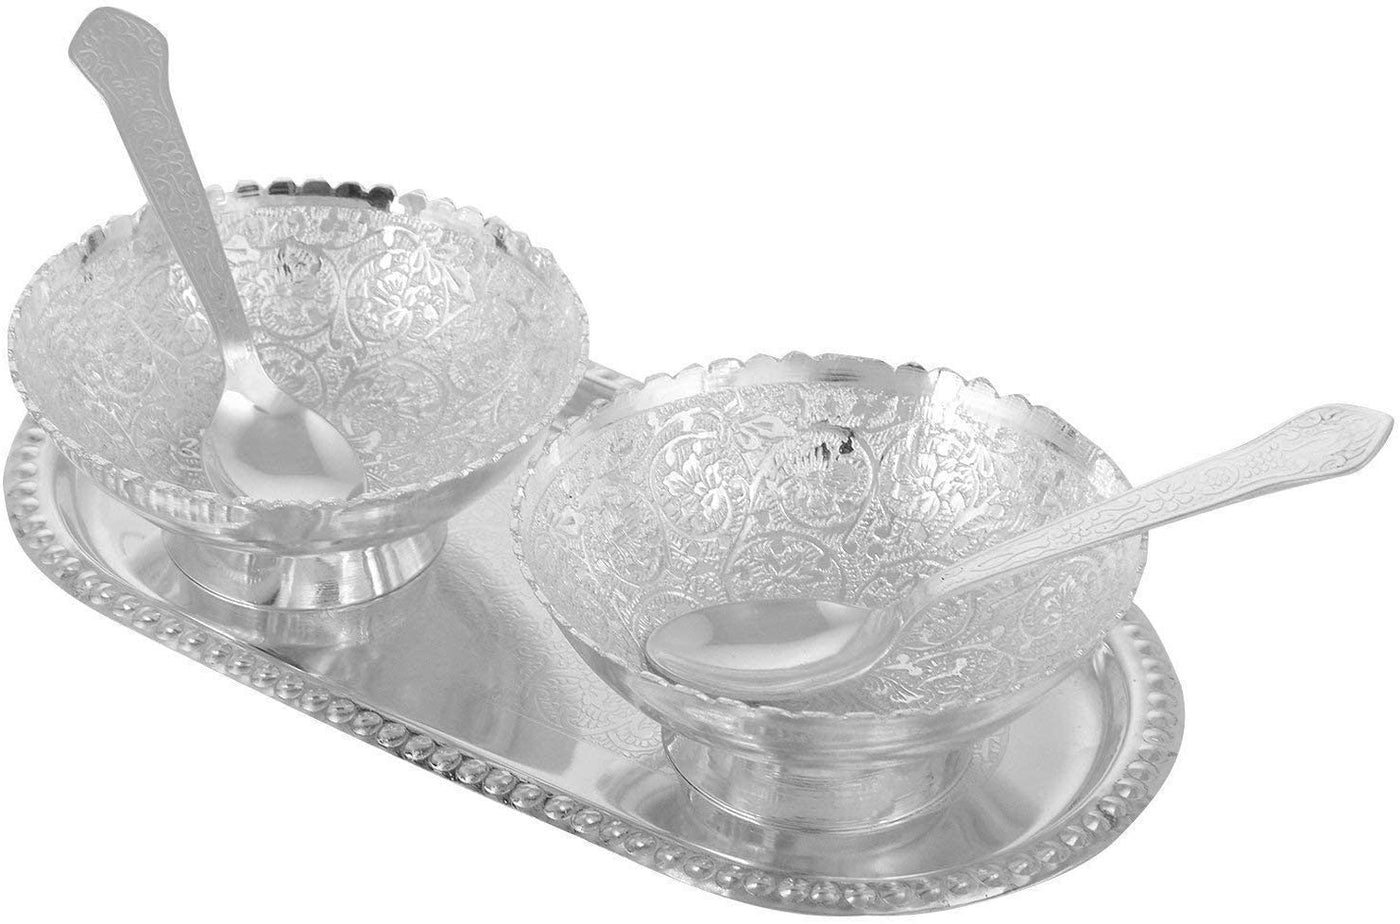 LAMANSH Sliver Bowl set Silver / Glossy / Standard LAMANSH® Rich Silver Plated Brass Bowl and Tray set / best for return gifts in wedding / German silver gift 🎁 products